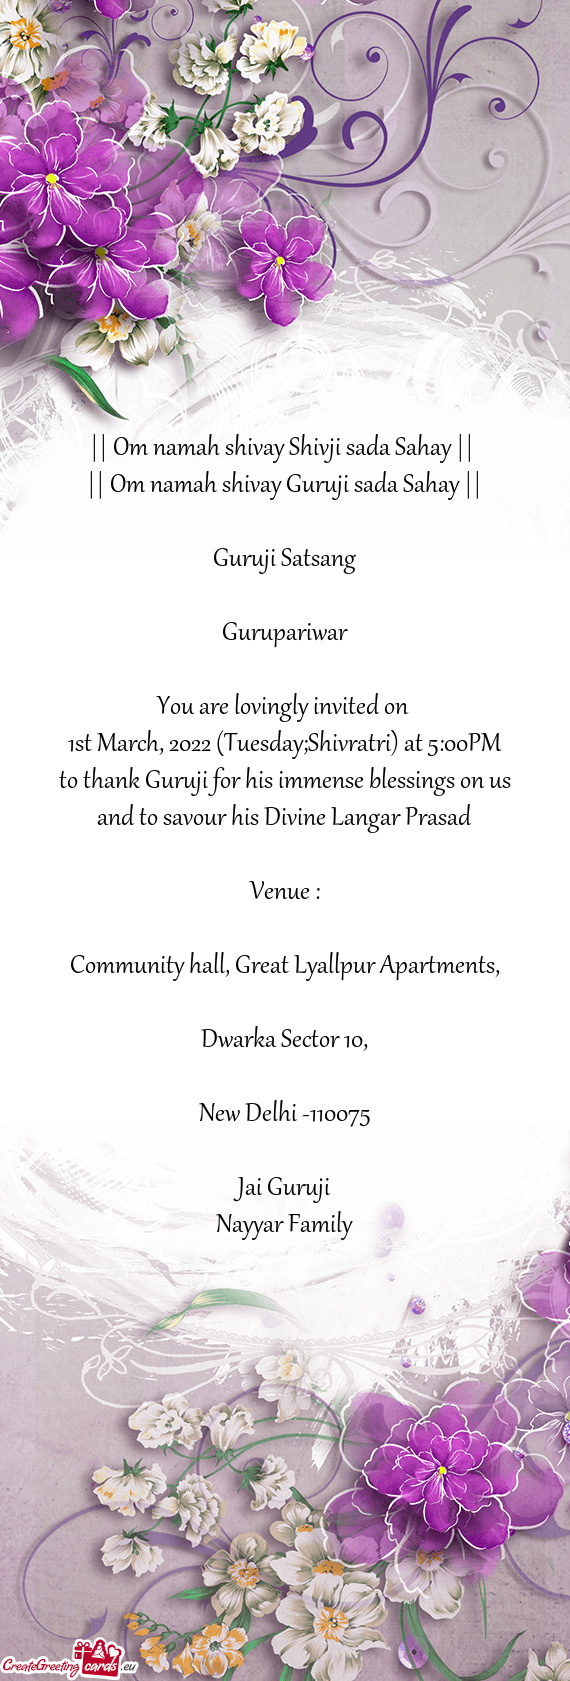 1st March, 2022 (Tuesday;Shivratri) at 5:00PM